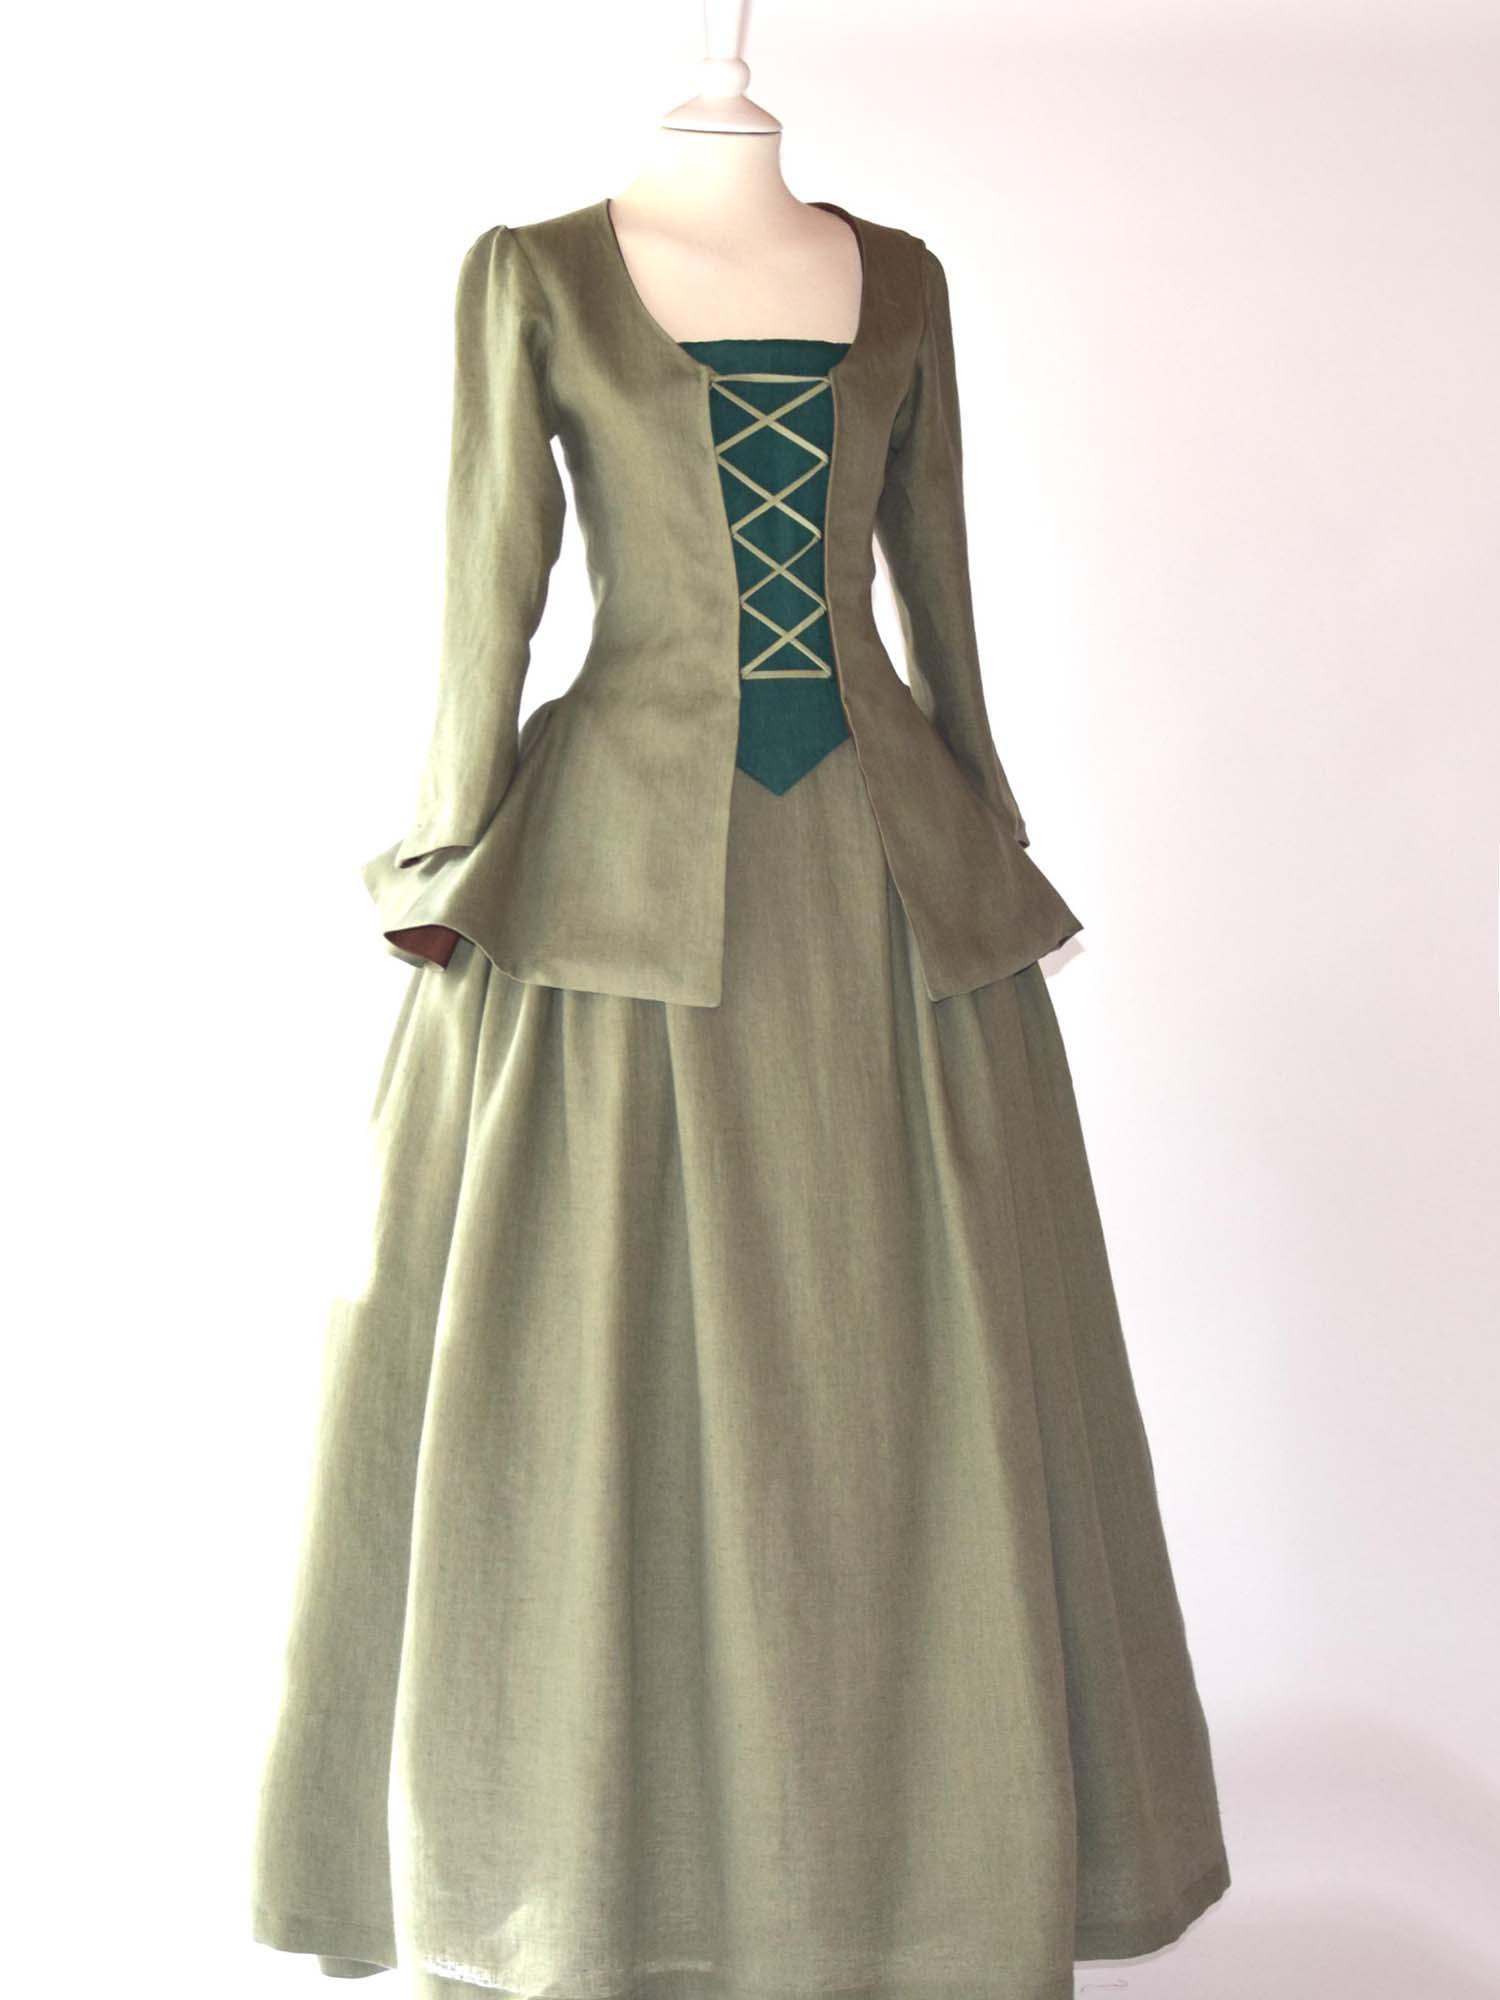 JANET, Colonial Costume in Sage Green Linen - Atelier Serraspina